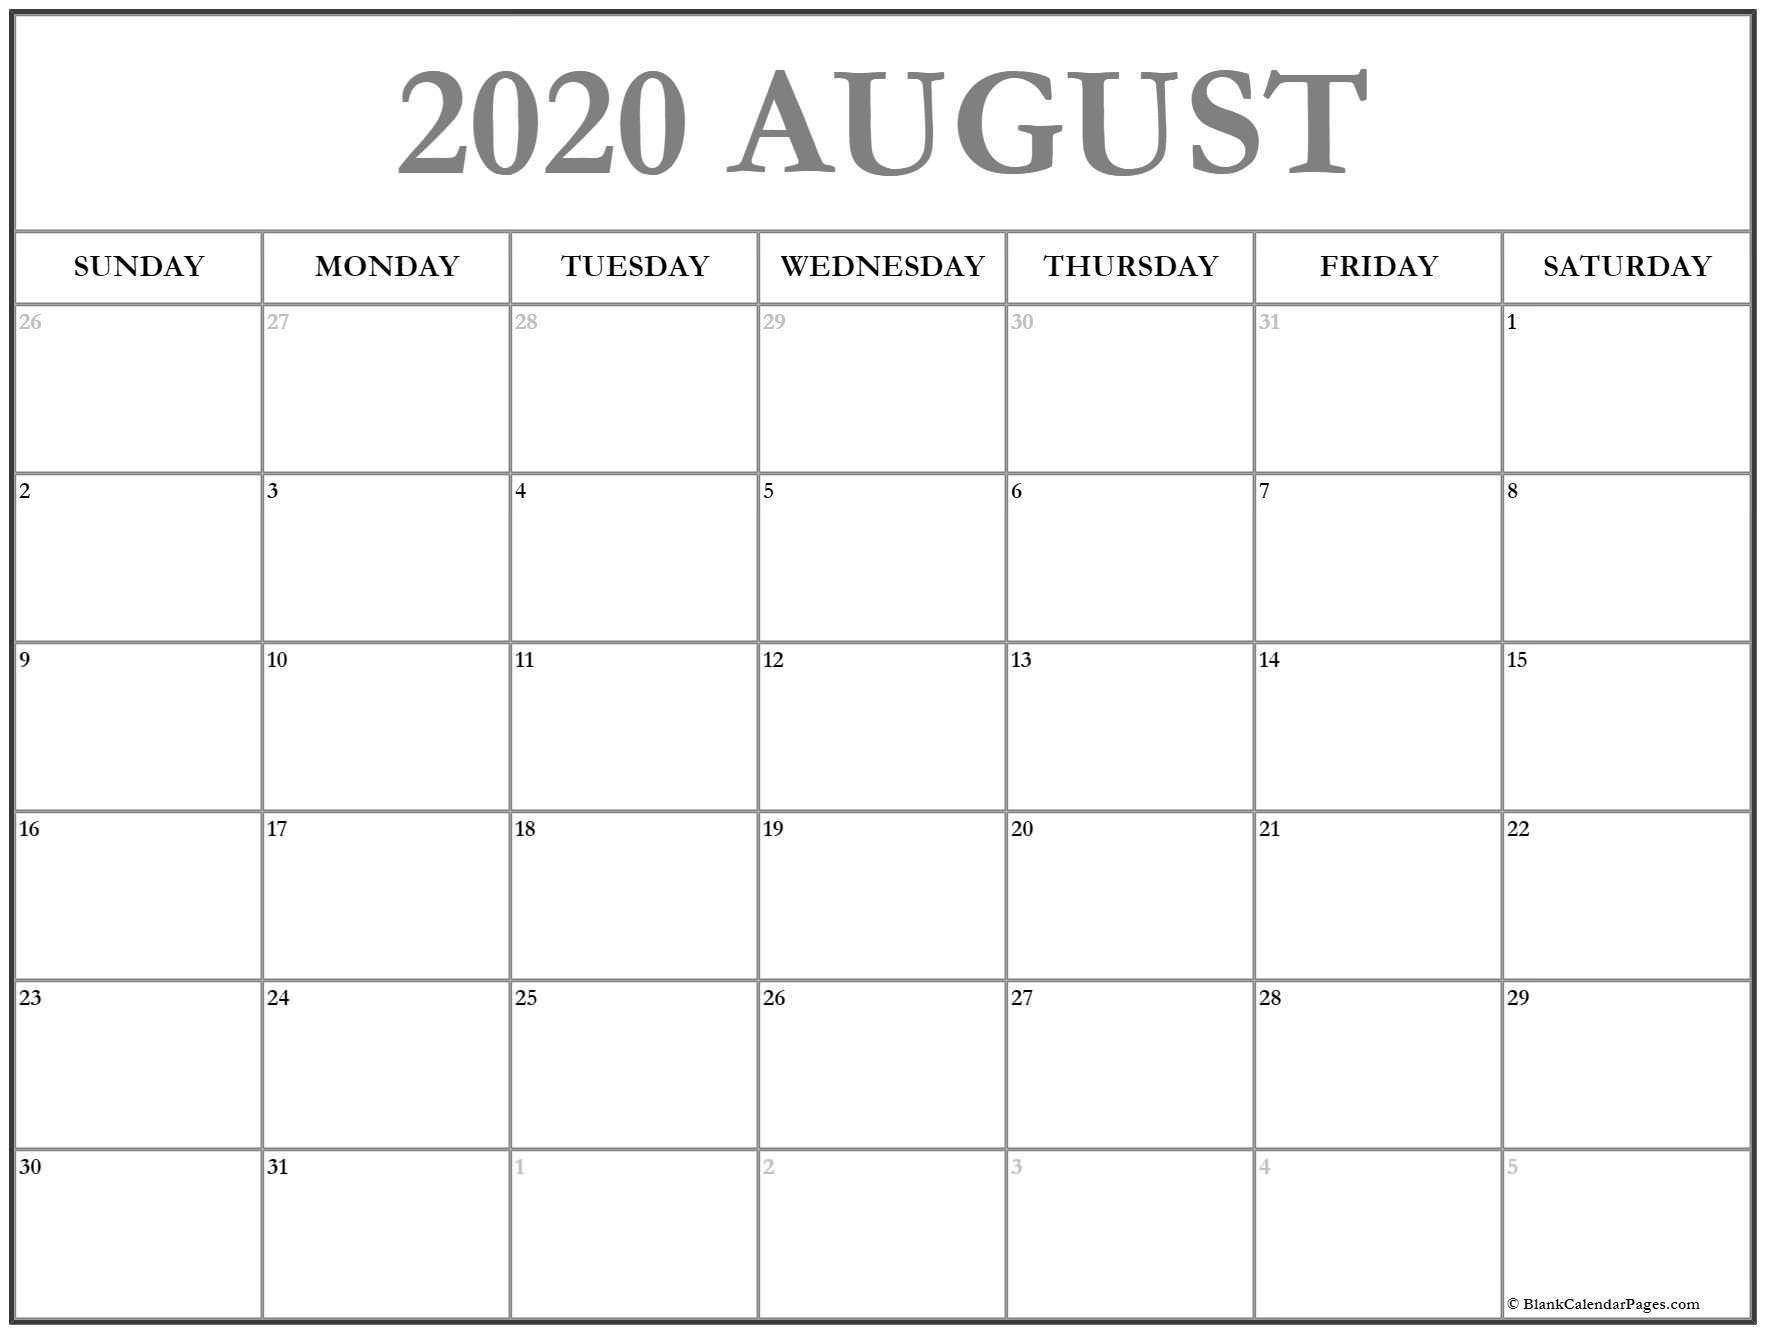 August 2020 Calendar | Free Printable Monthly Calendars-Free Bills Pay Calendar 2020 Printable Monthly